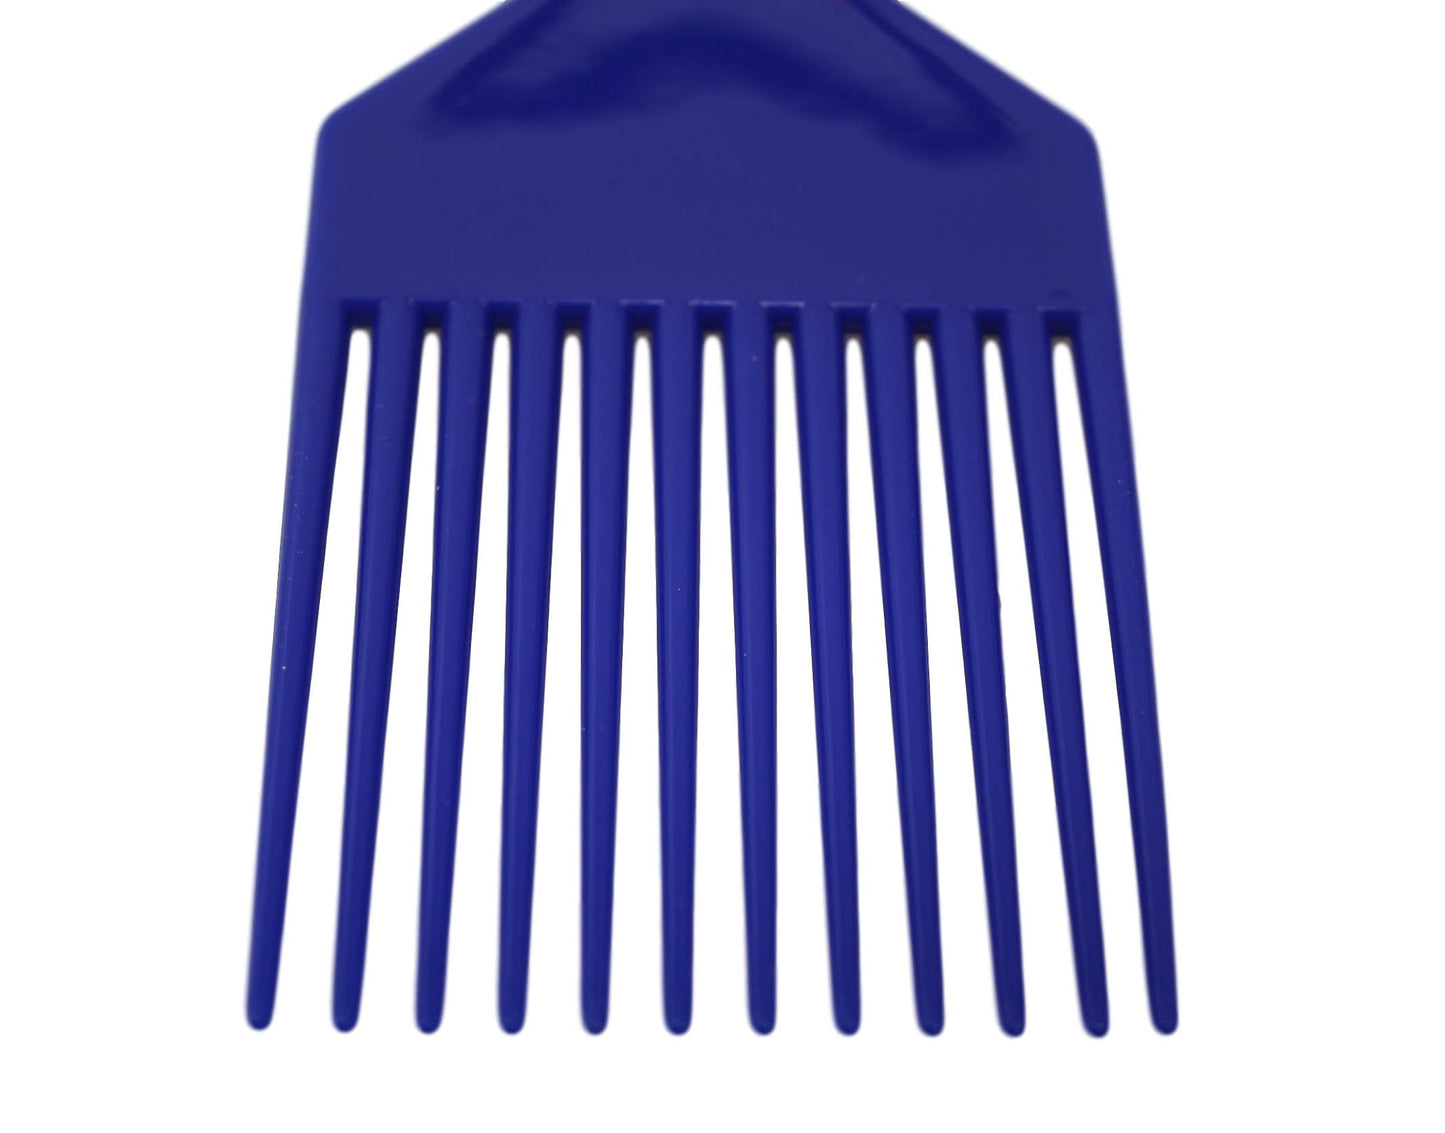 Professional 3 Piece AFRO Styling Hair Comb Long Teeth Untangling Comb 18 x 7cm 5945 (Large Letter Rate)